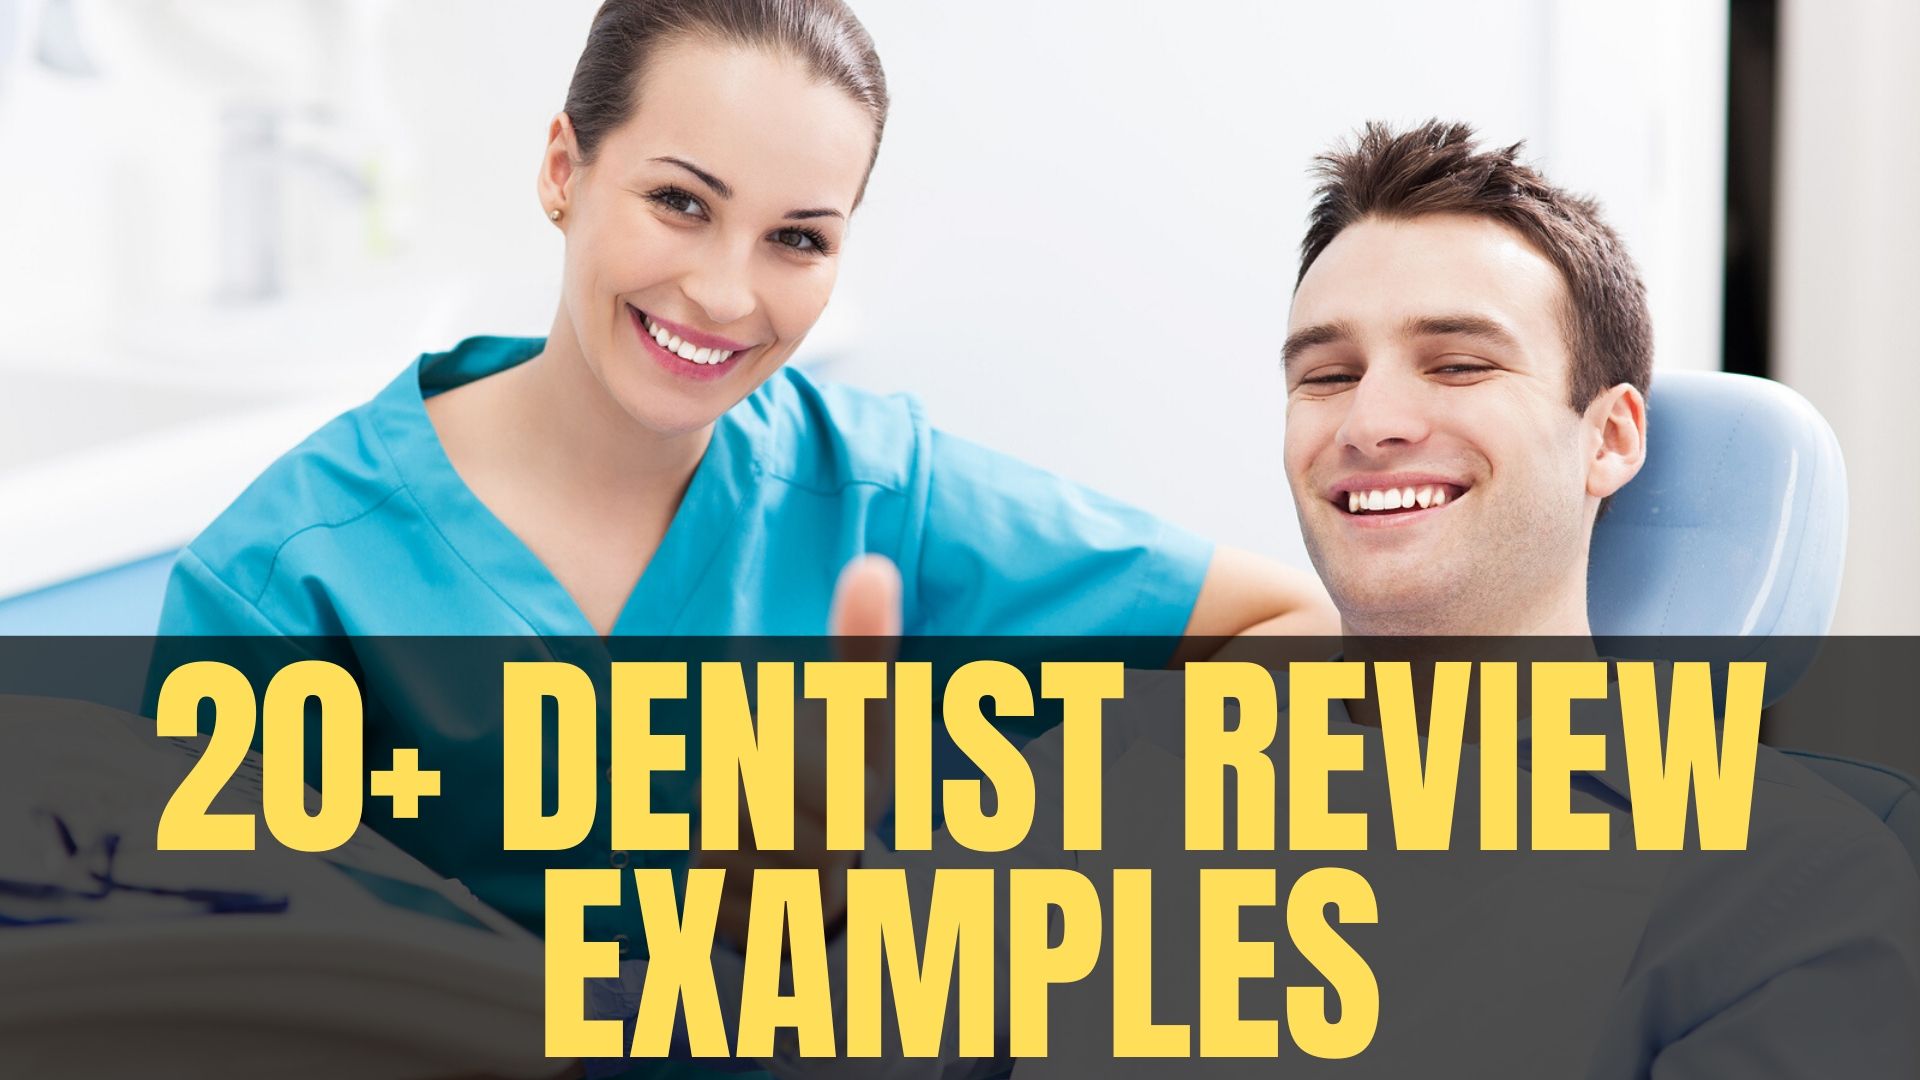 Dentist Review Examples